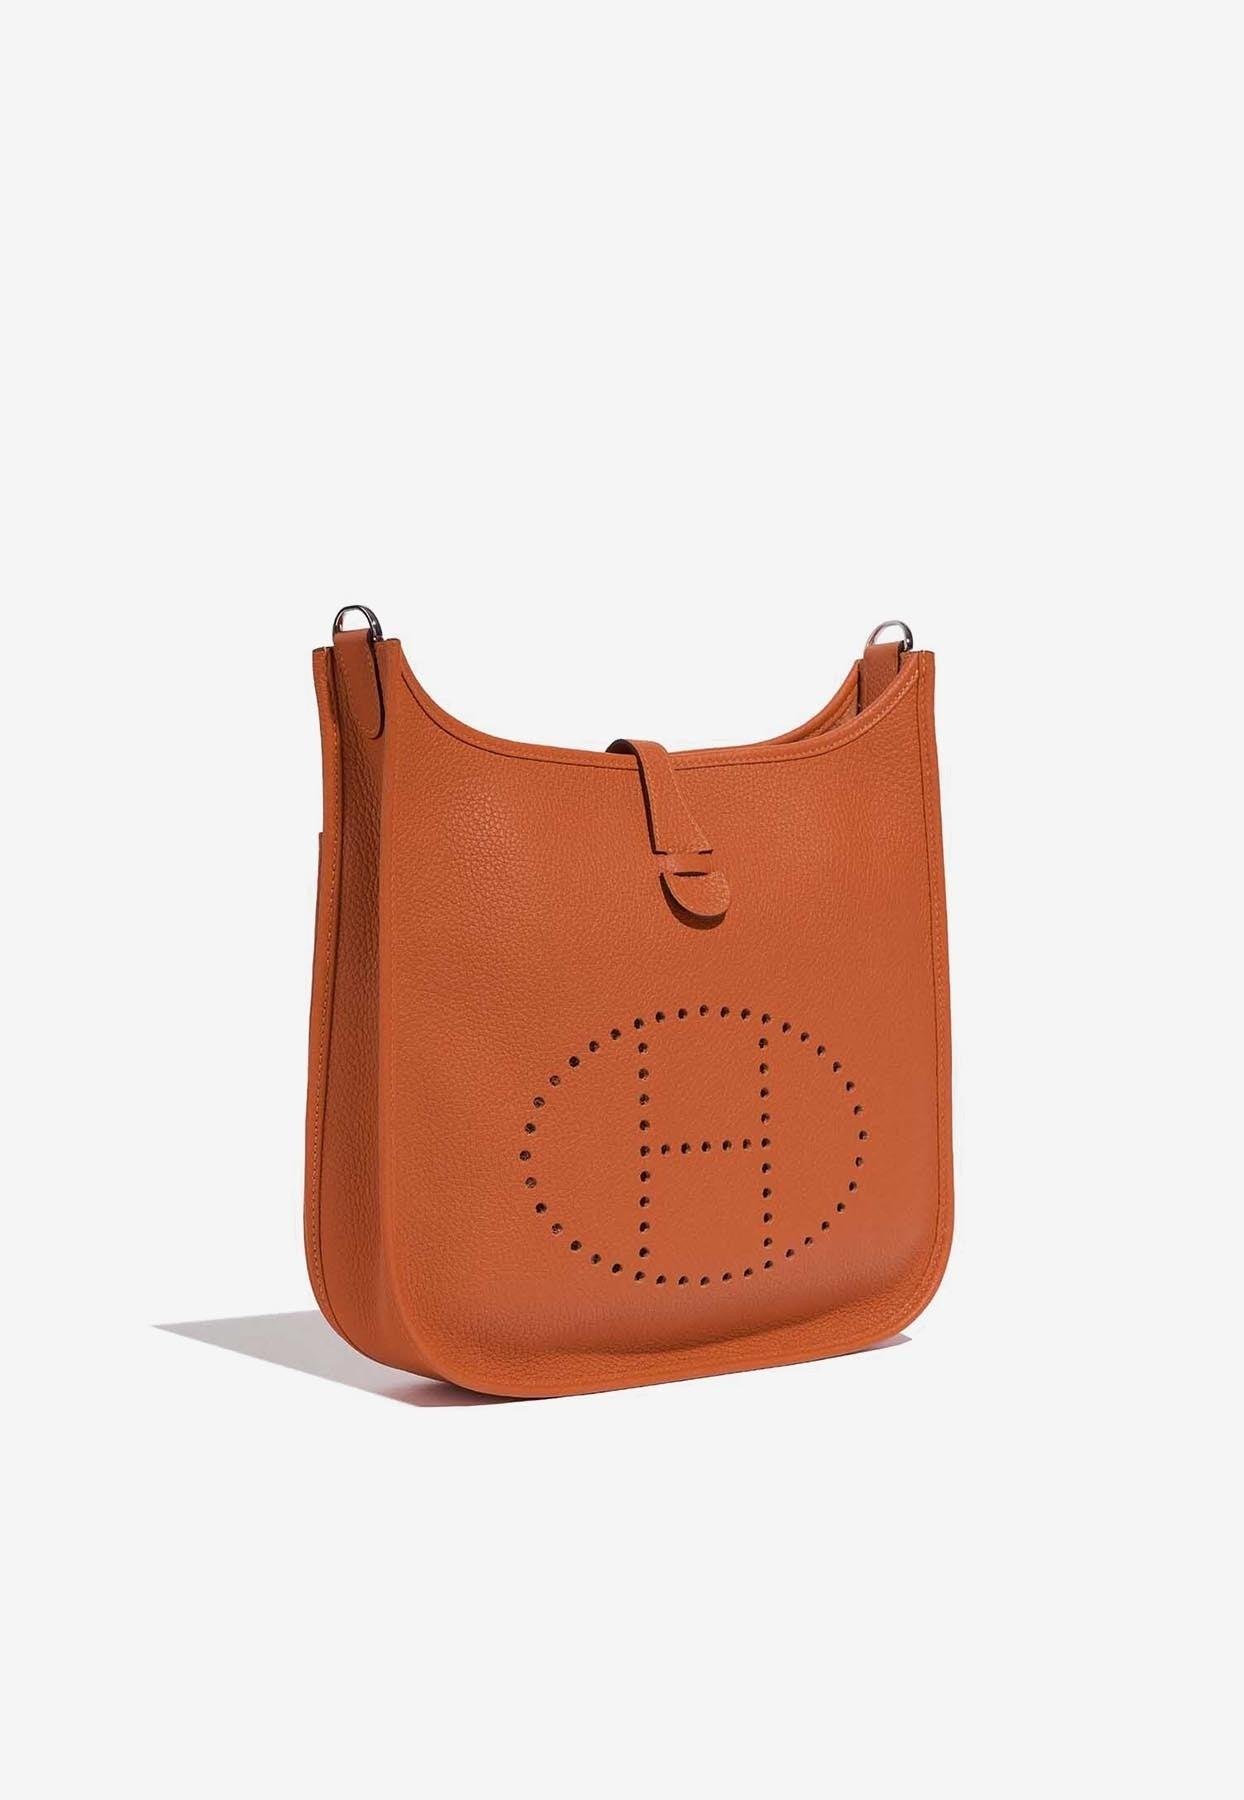 Hermès Evelyne Iii 29 In Orange H Taurillon Clemence With